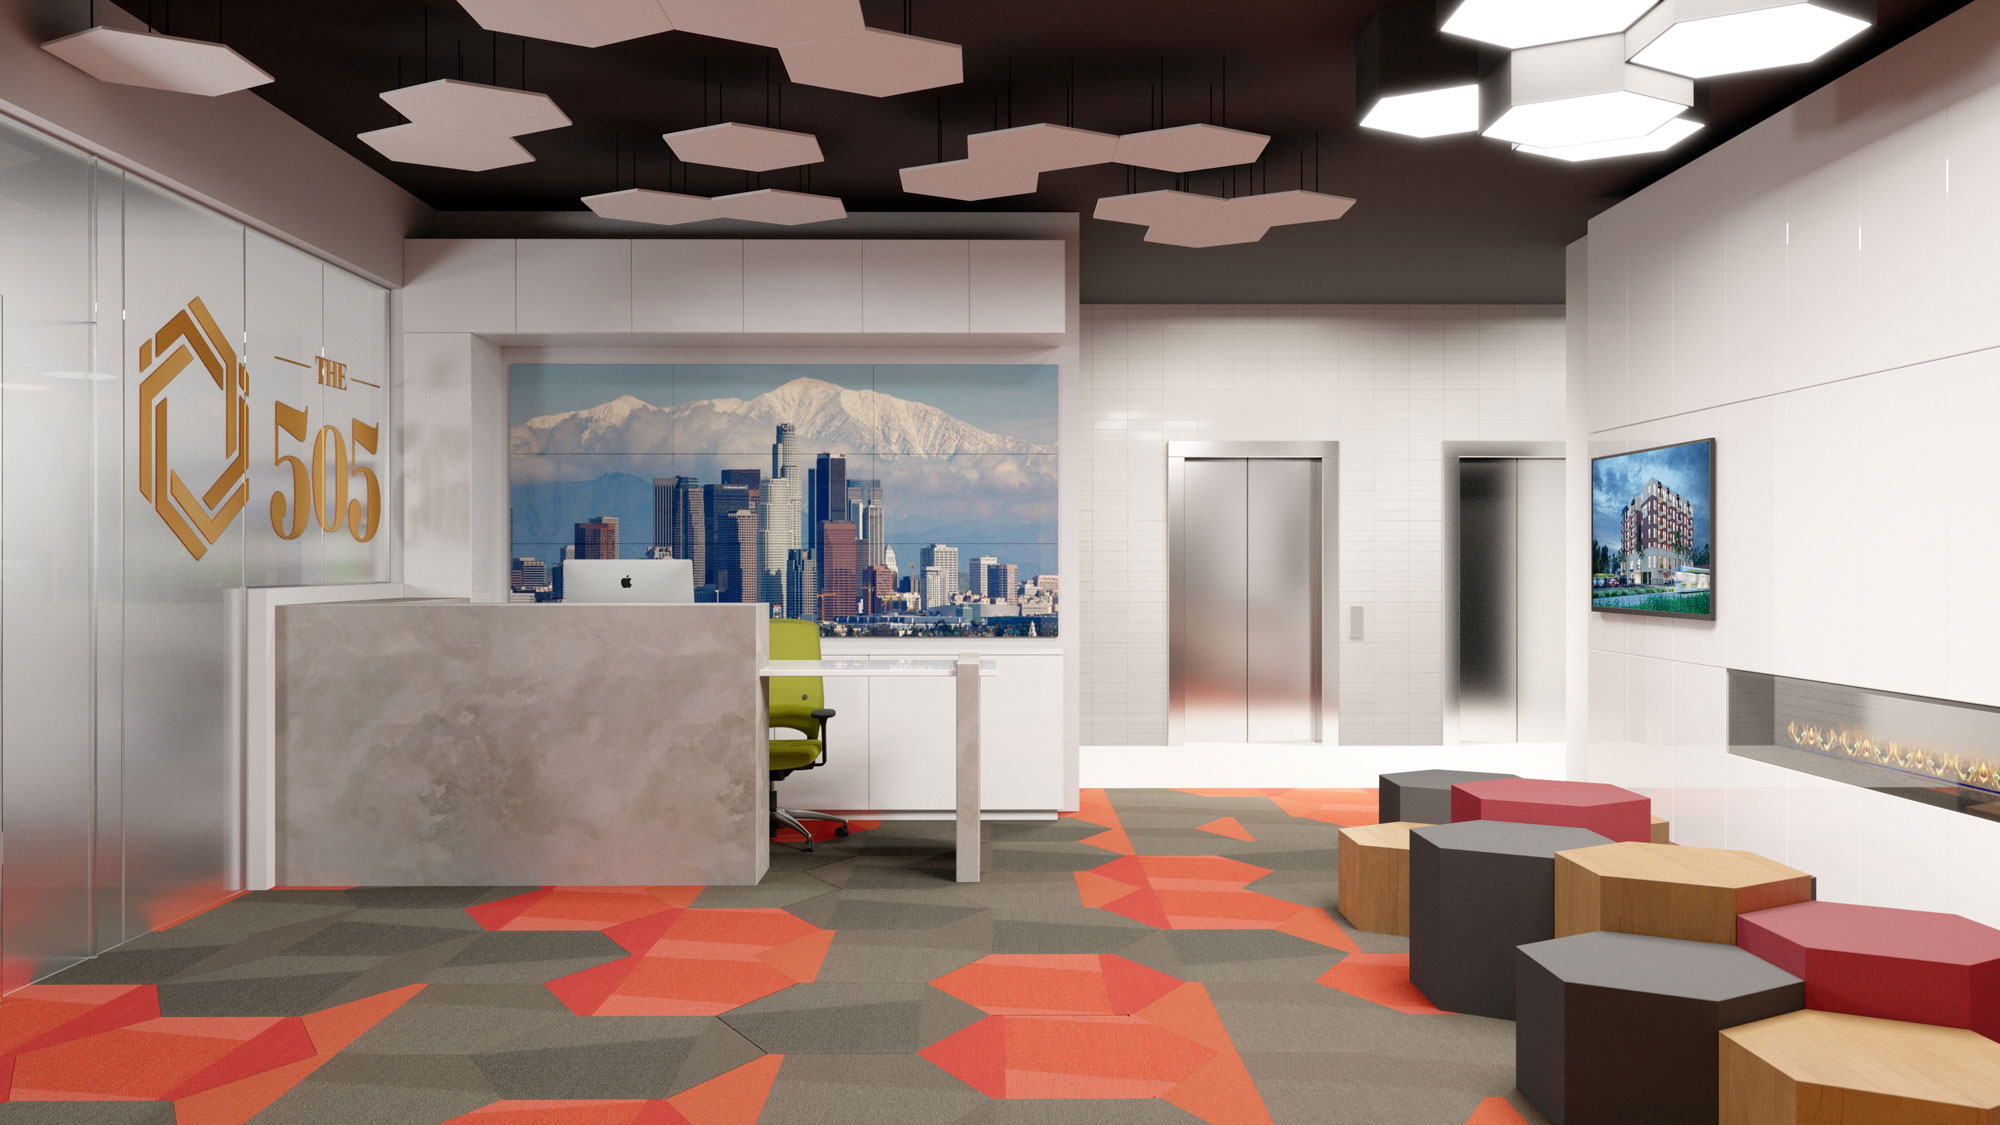 entrance lobby with seating, reception desk, wall artwork, and carpet flooring